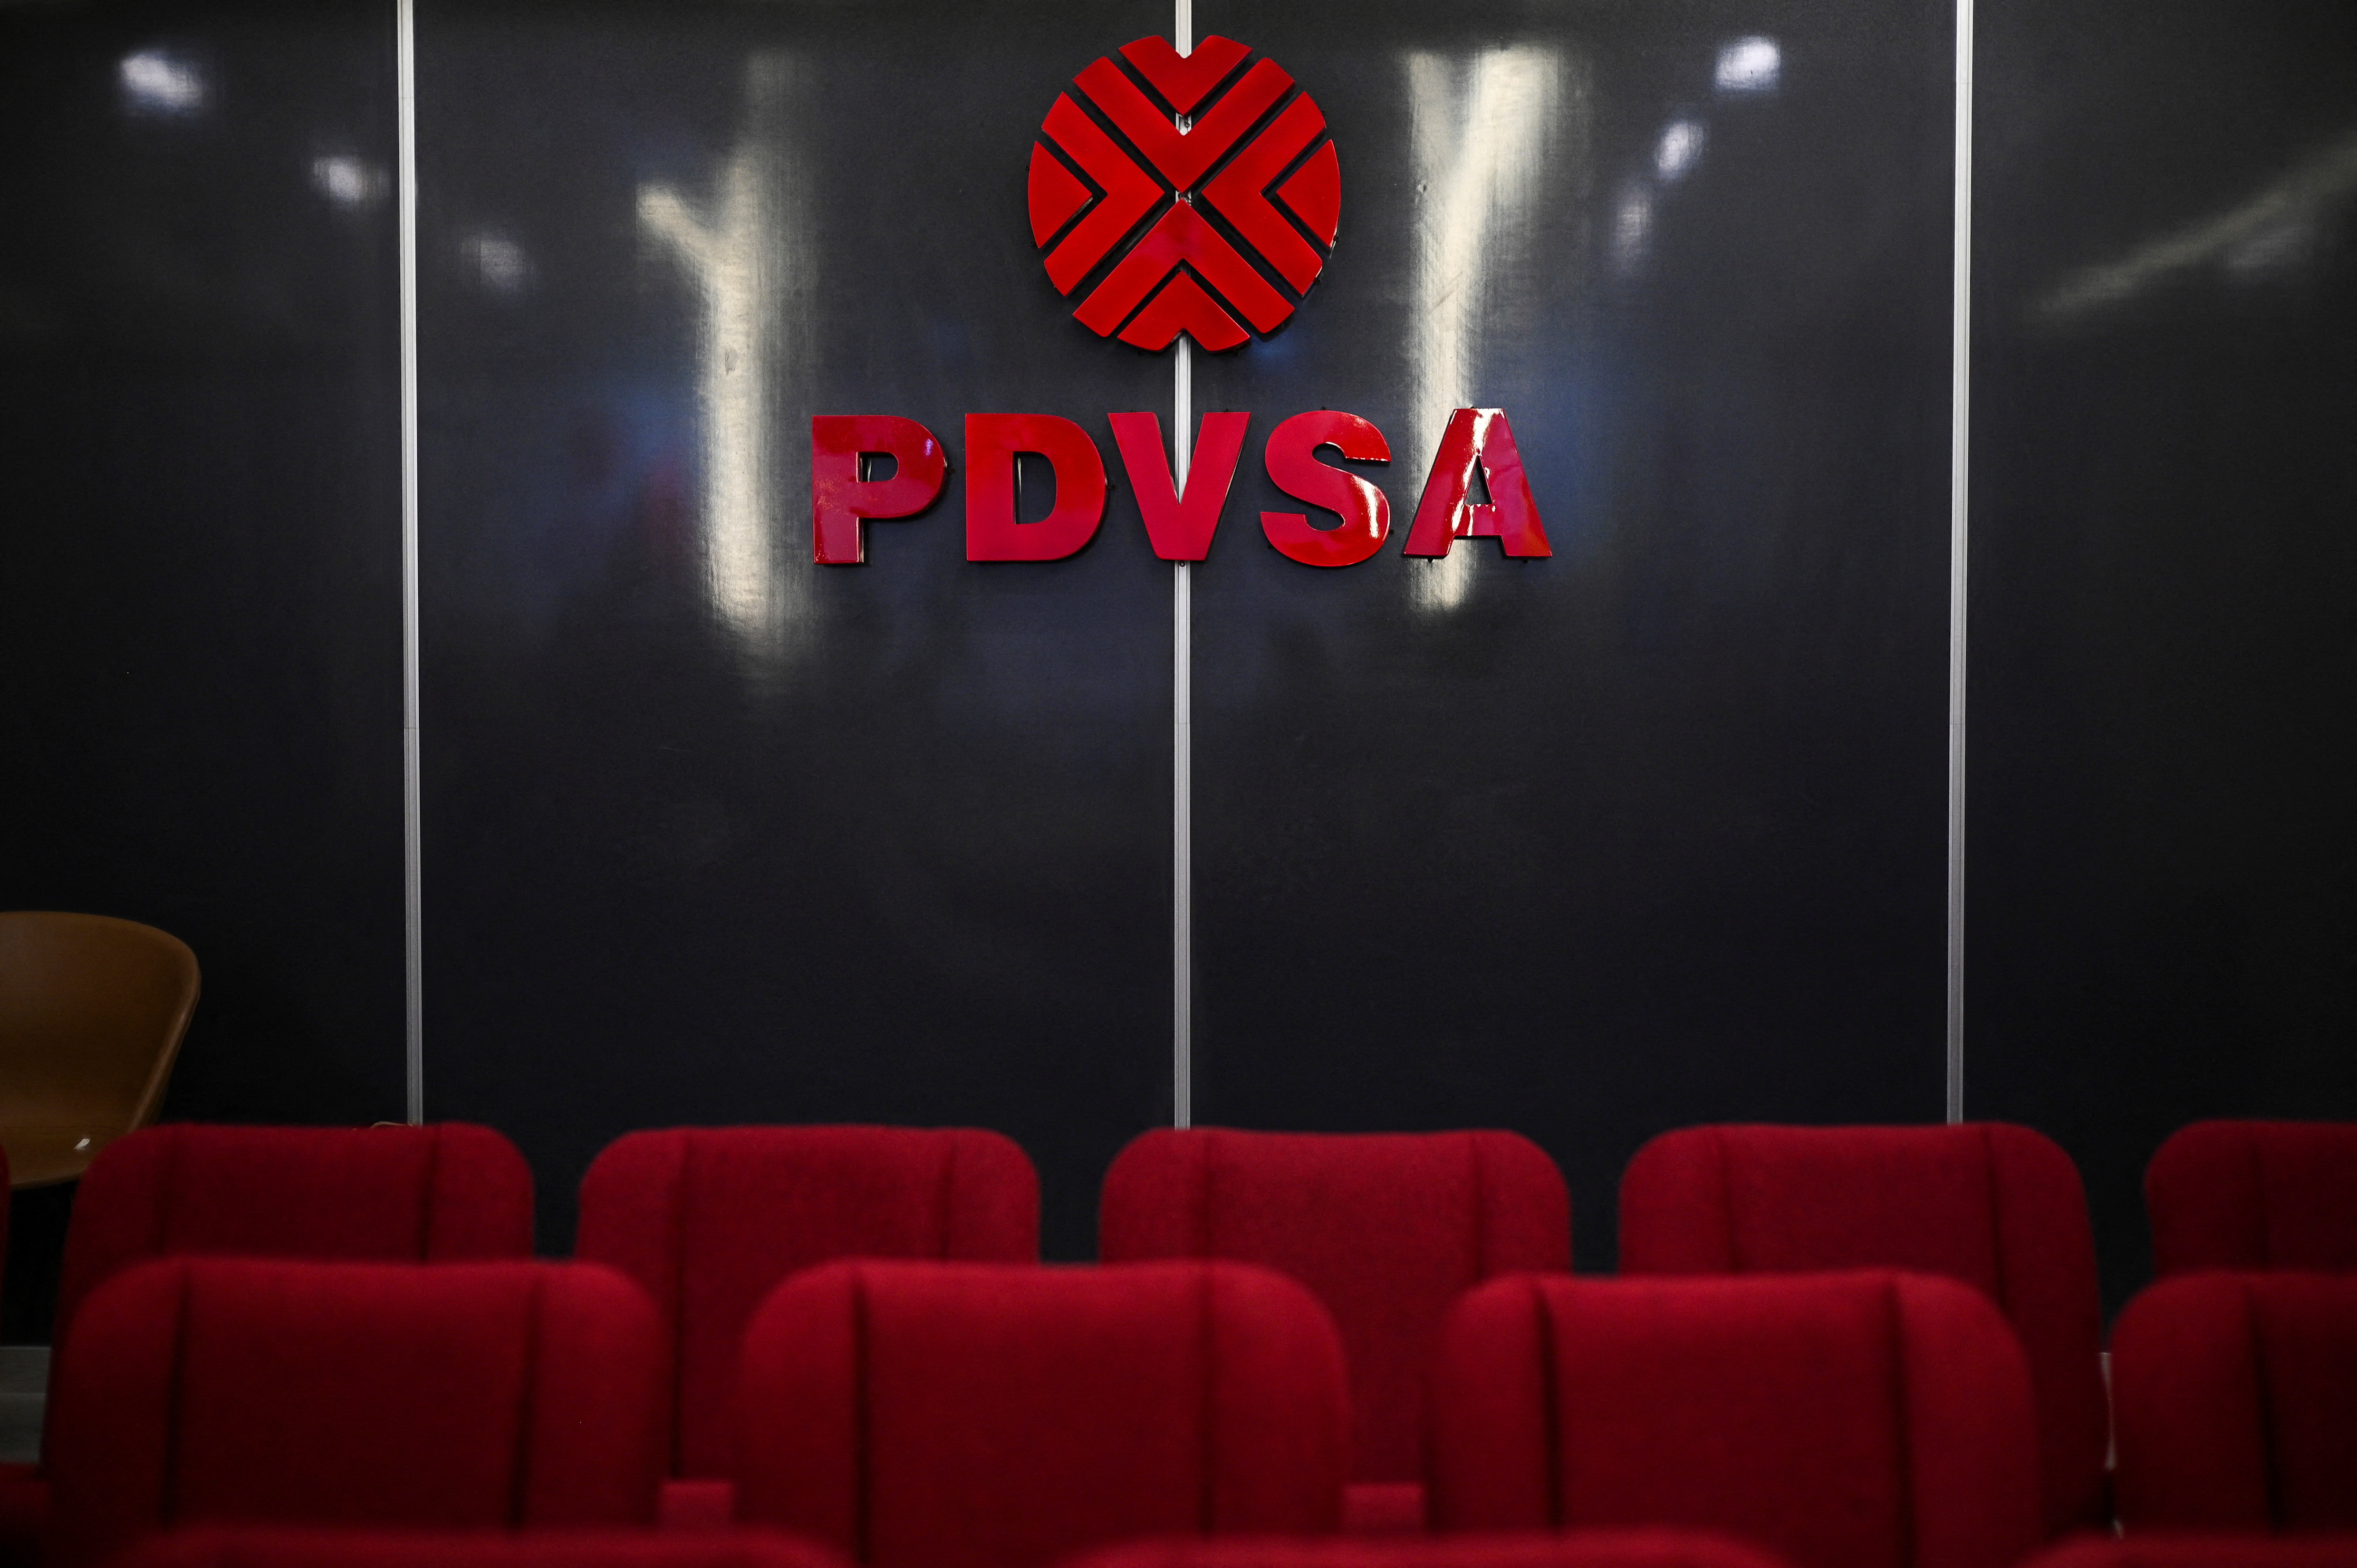 Venezuela's PDVSA and Spain's Repsol agree to revive oil joint venture, in Caracas